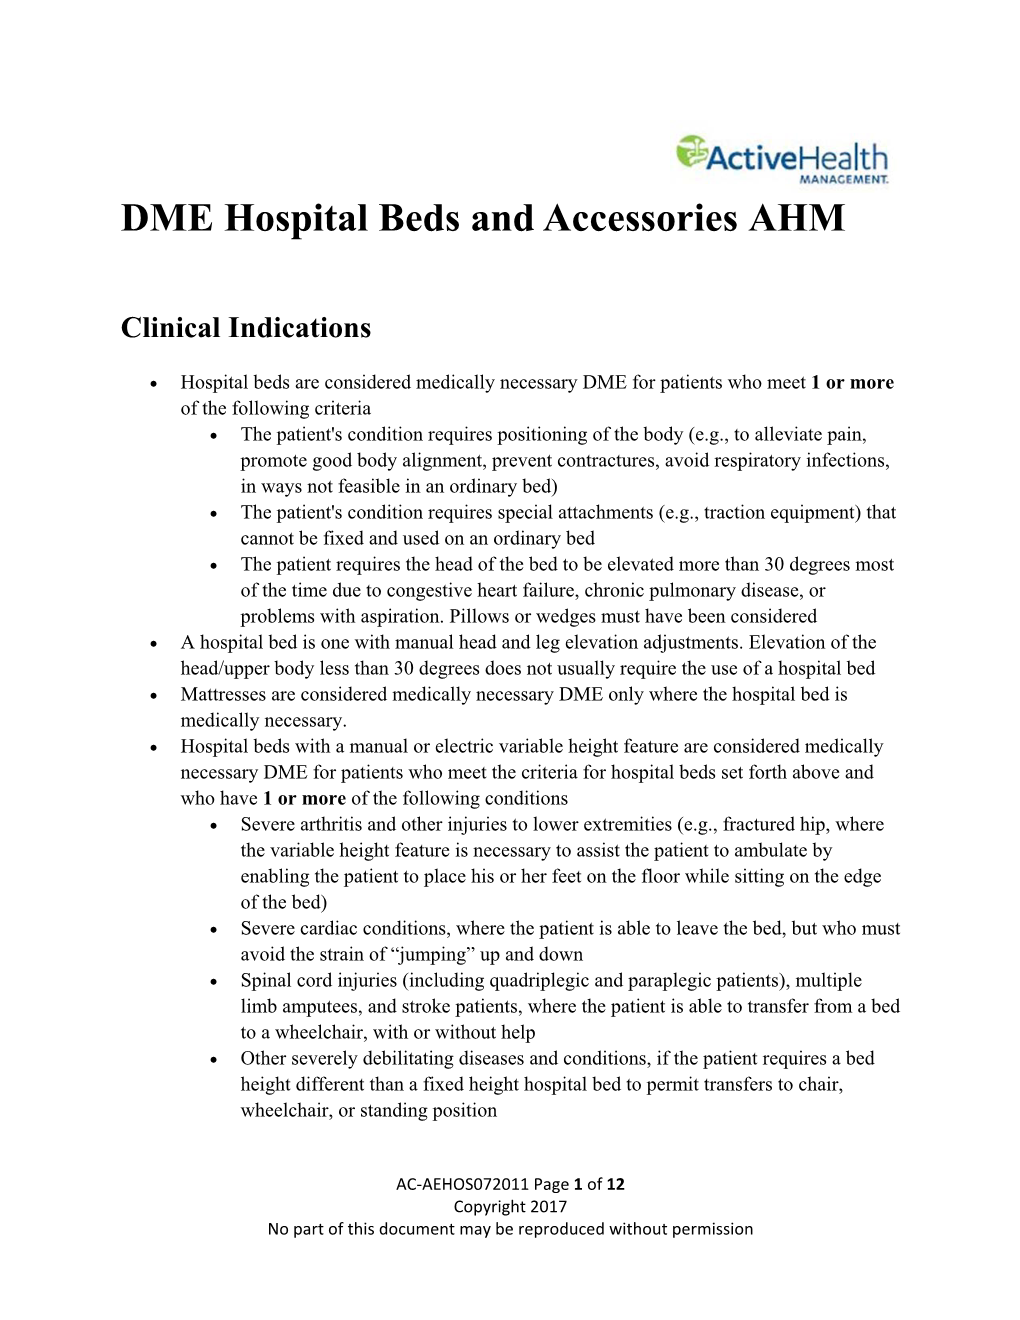 DME Hospital Beds and Accessories AHM